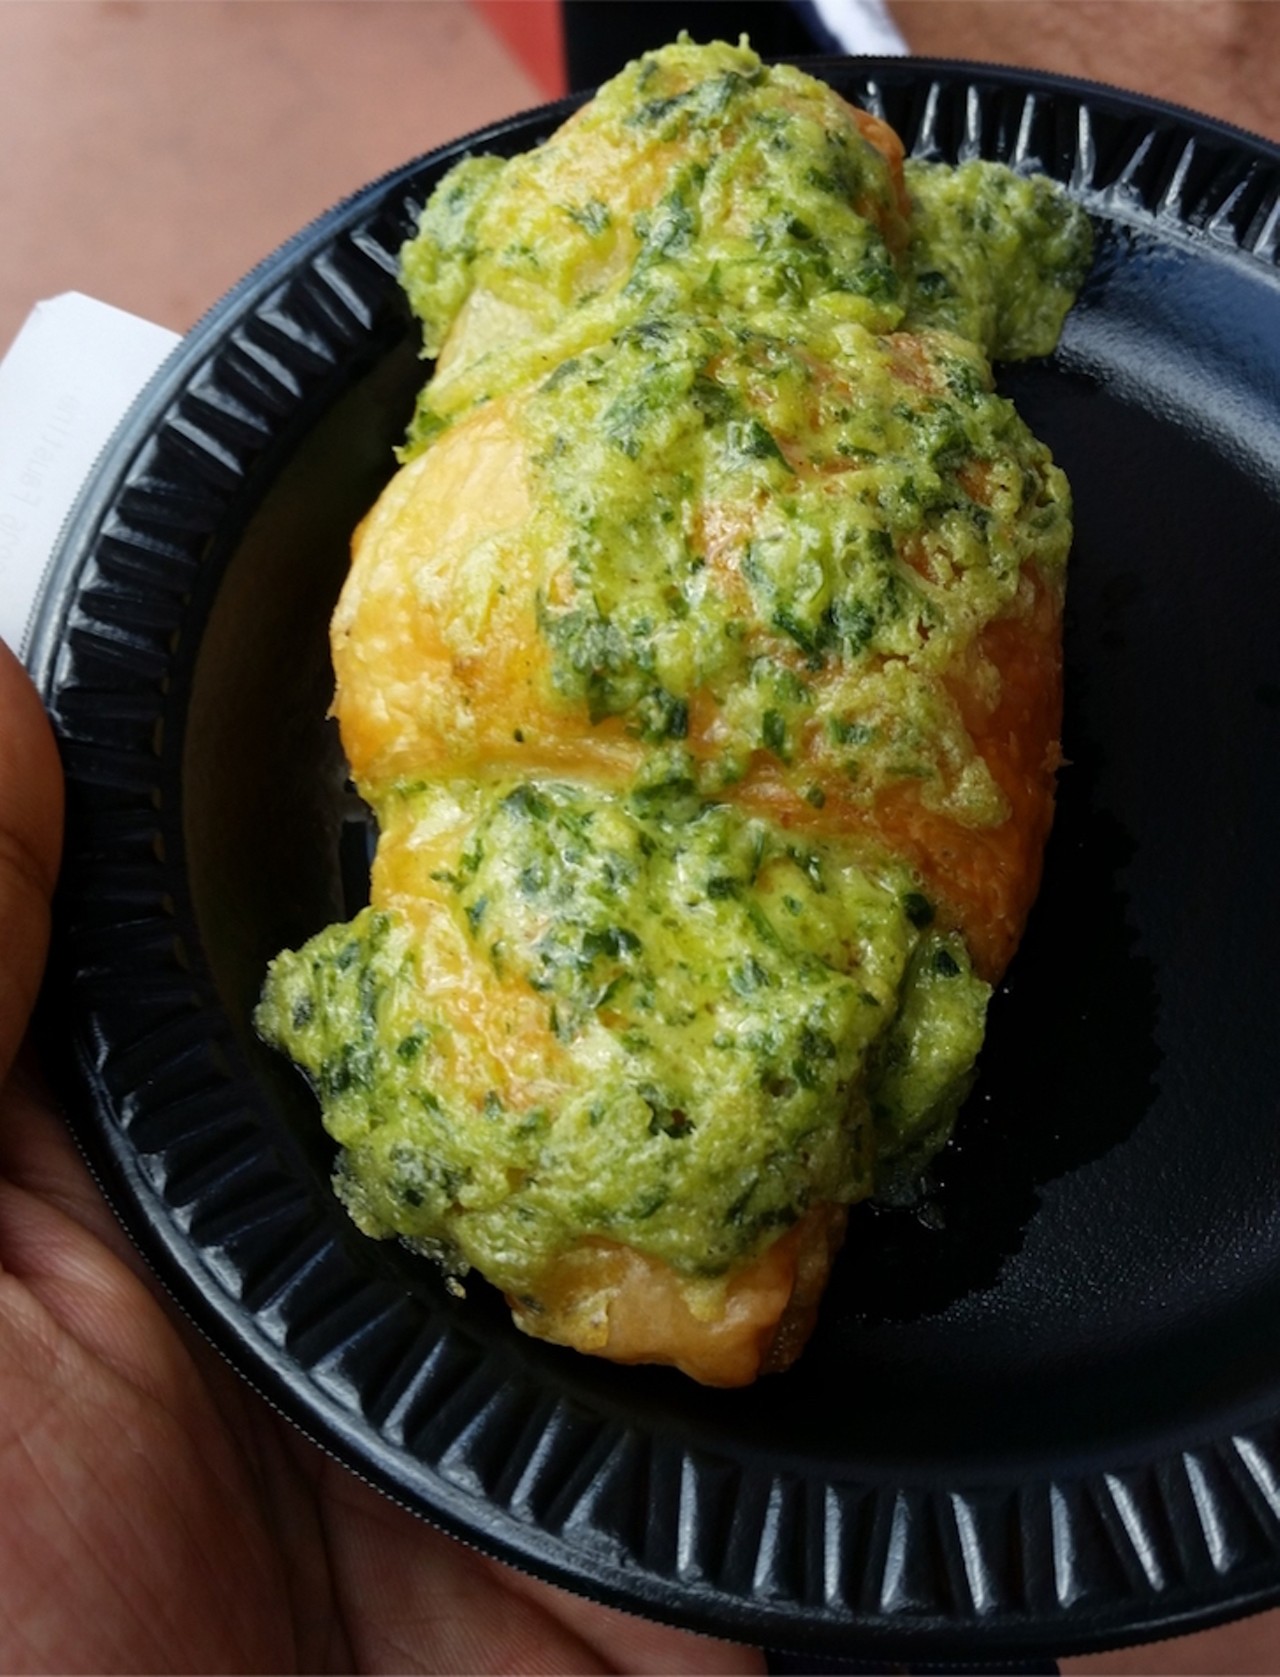 Escargot croissant with garlic and parsley (France)